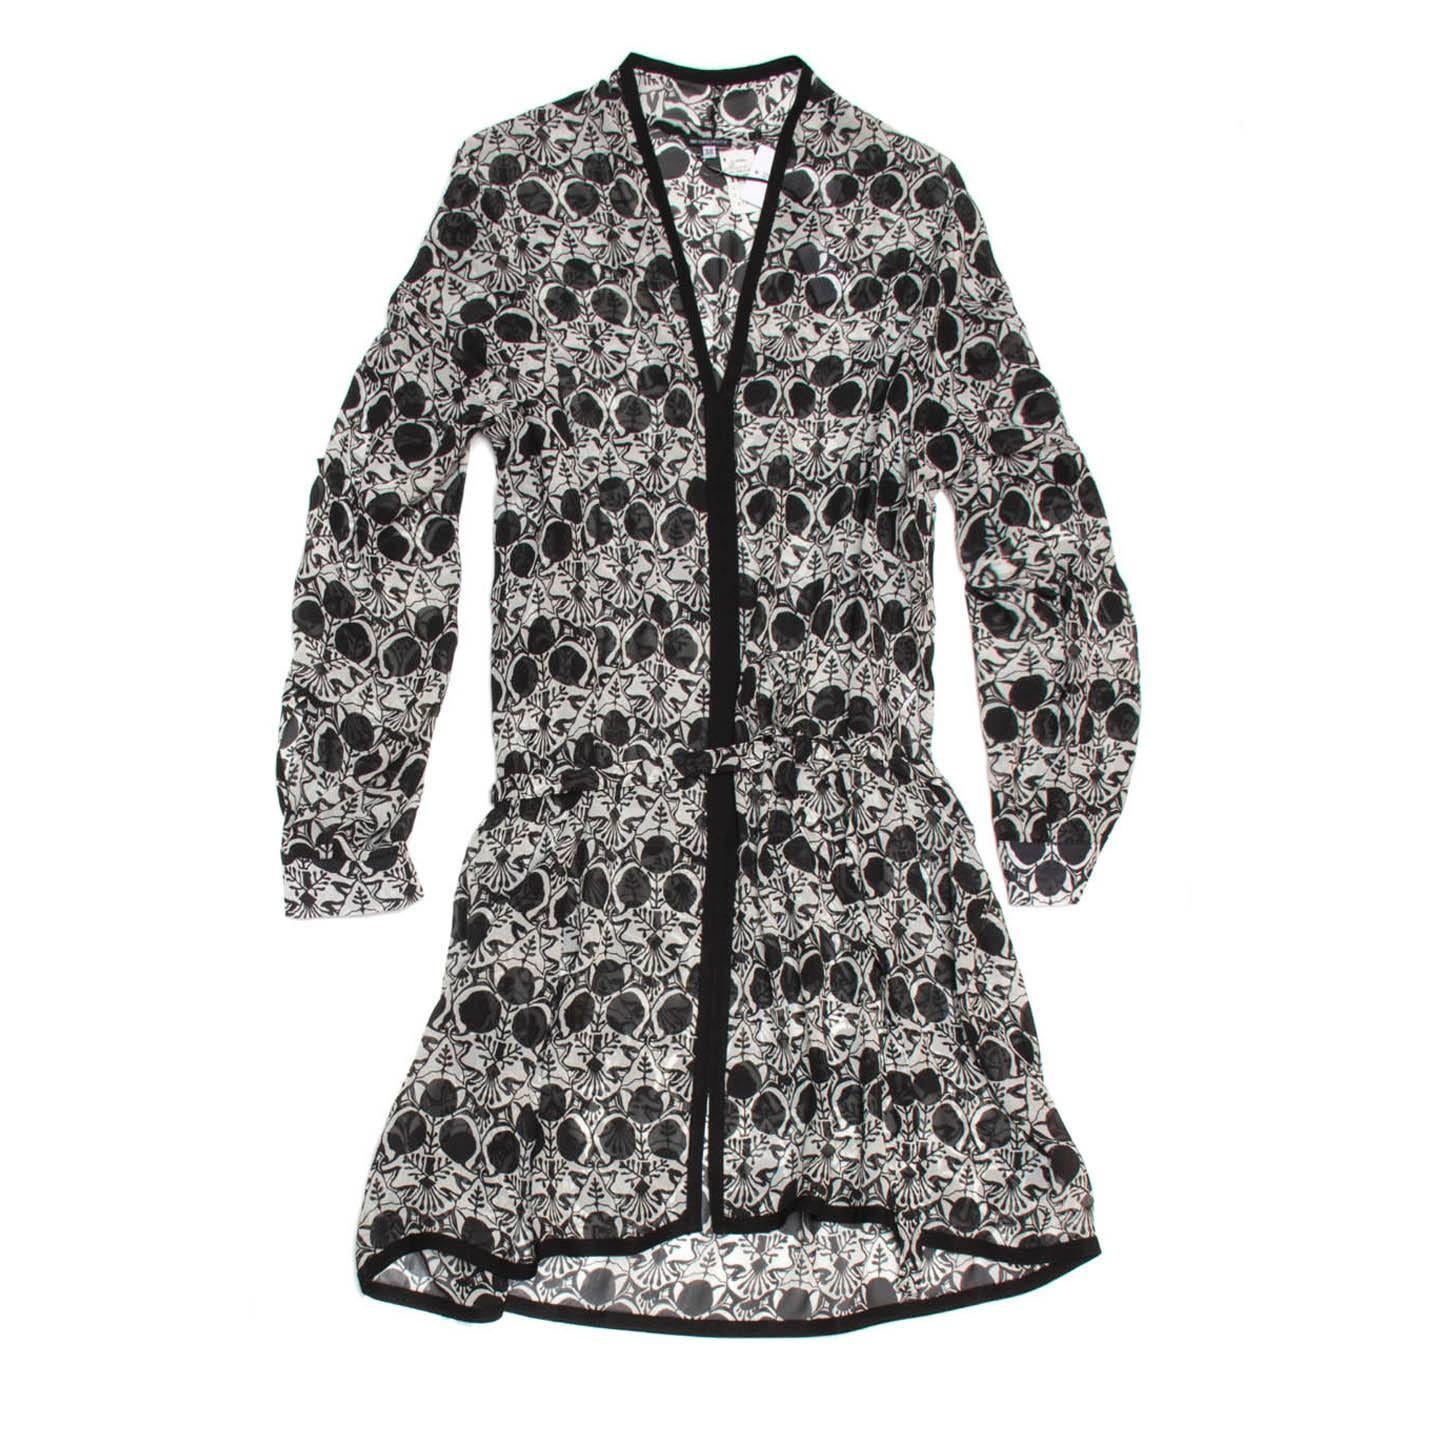 Black & white silk chiffon knee length caftan style tunic. The dress has a beautiful Art Deco print and it is decorated with a fine black grosgrain ribbon at neckline, center front and hem. The shoulders are low, the sleeves are shirt style with